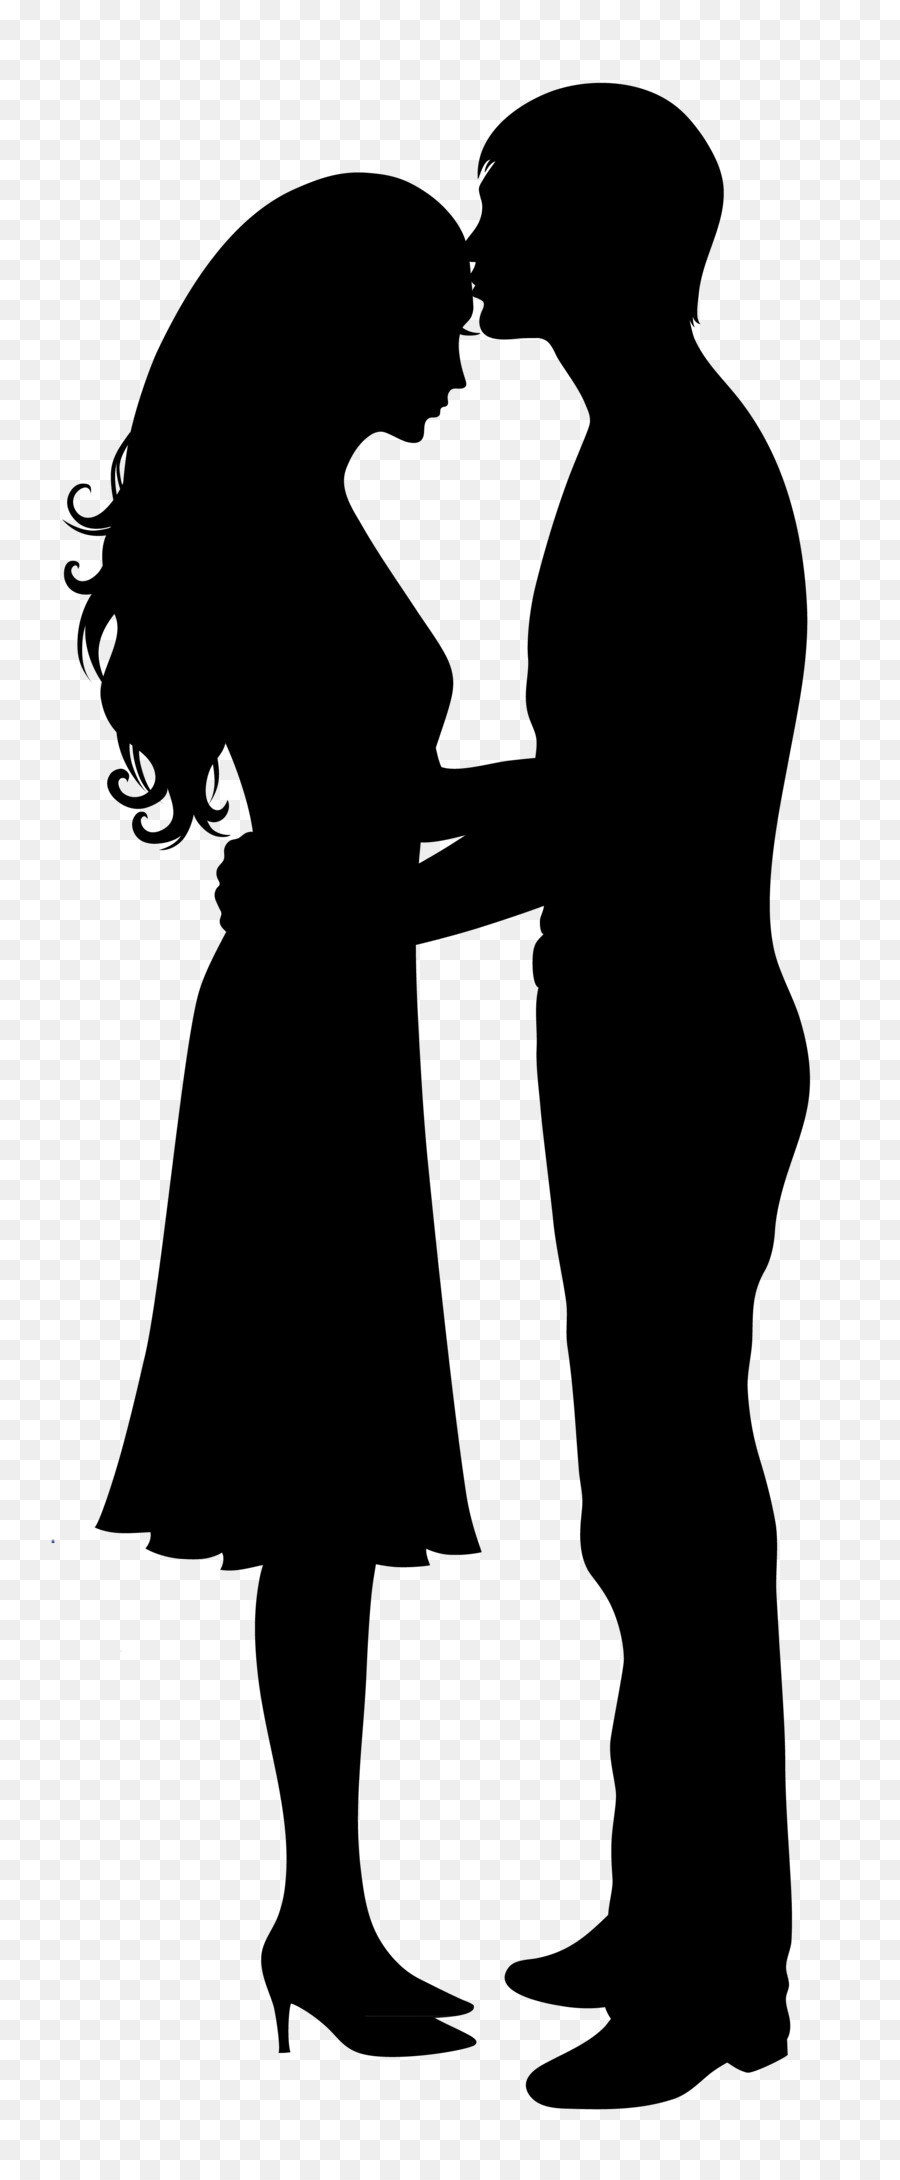 Silhouette couple - Couple silhouette figures png download - 2212*5319 - Free Transparent Silhouette png Download.